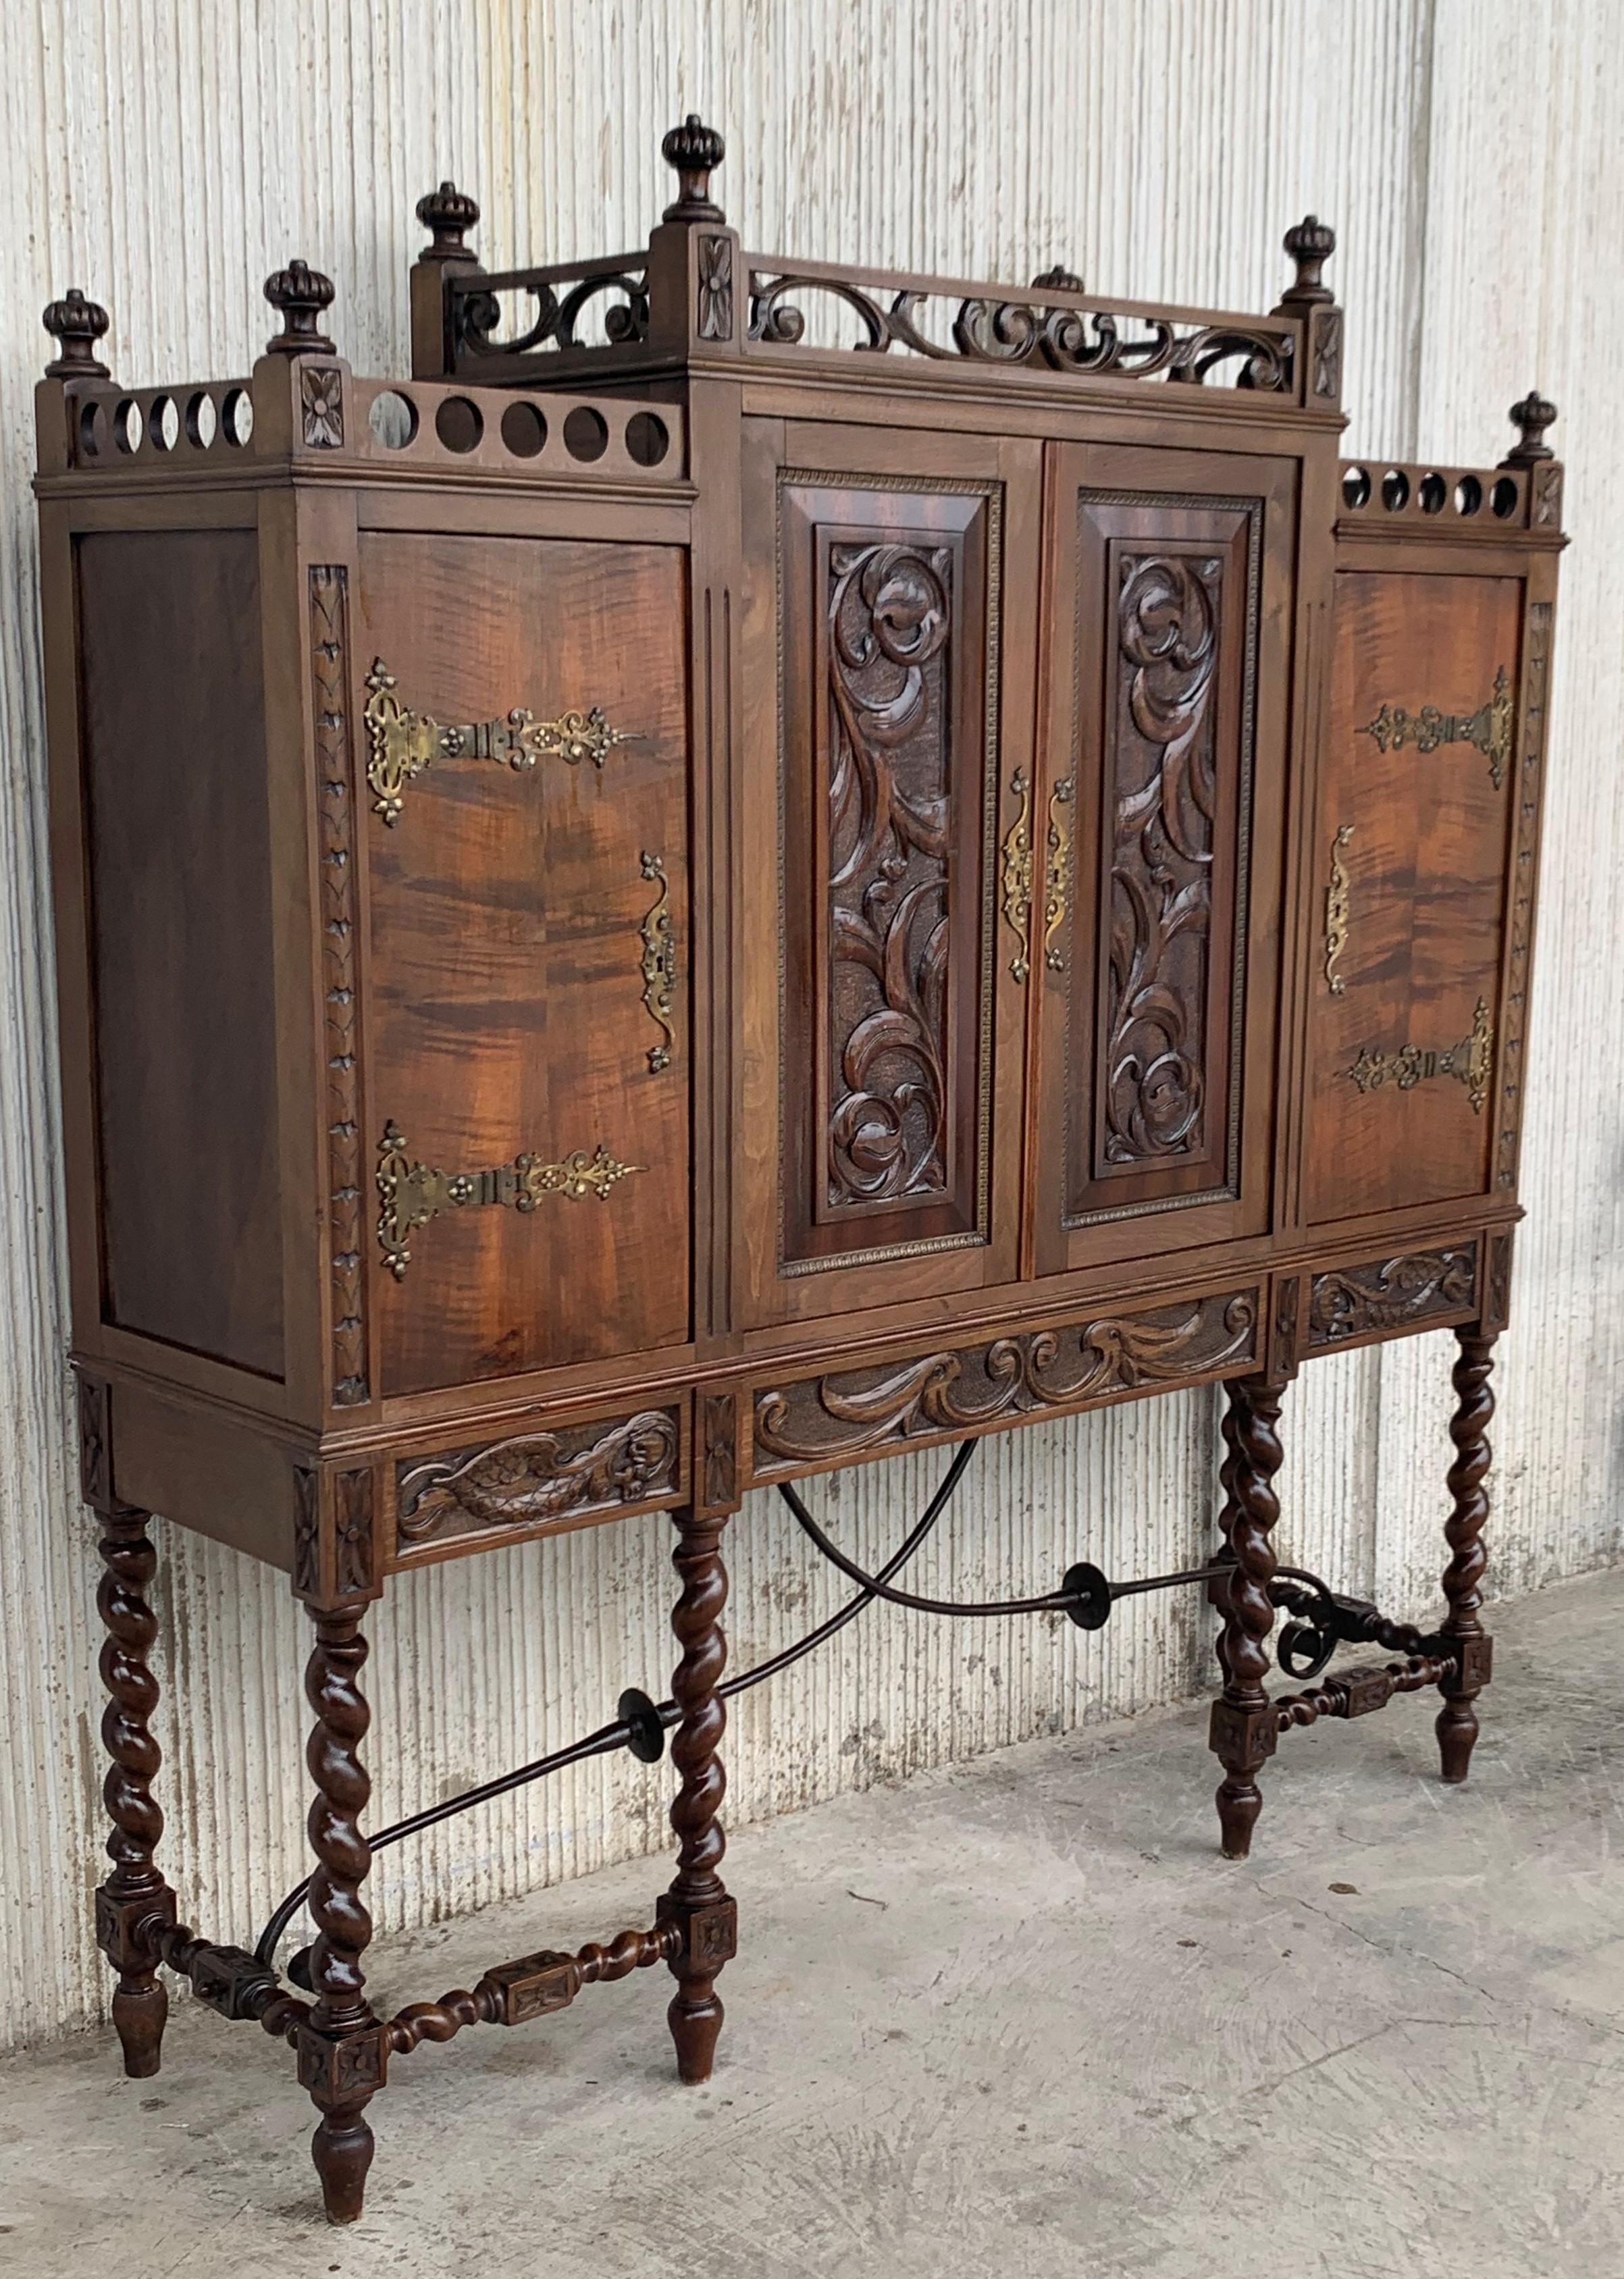 Baroque Revival 19th Century Wood Carved Cupboard, Cabinet on Stand with Iron Stretcher